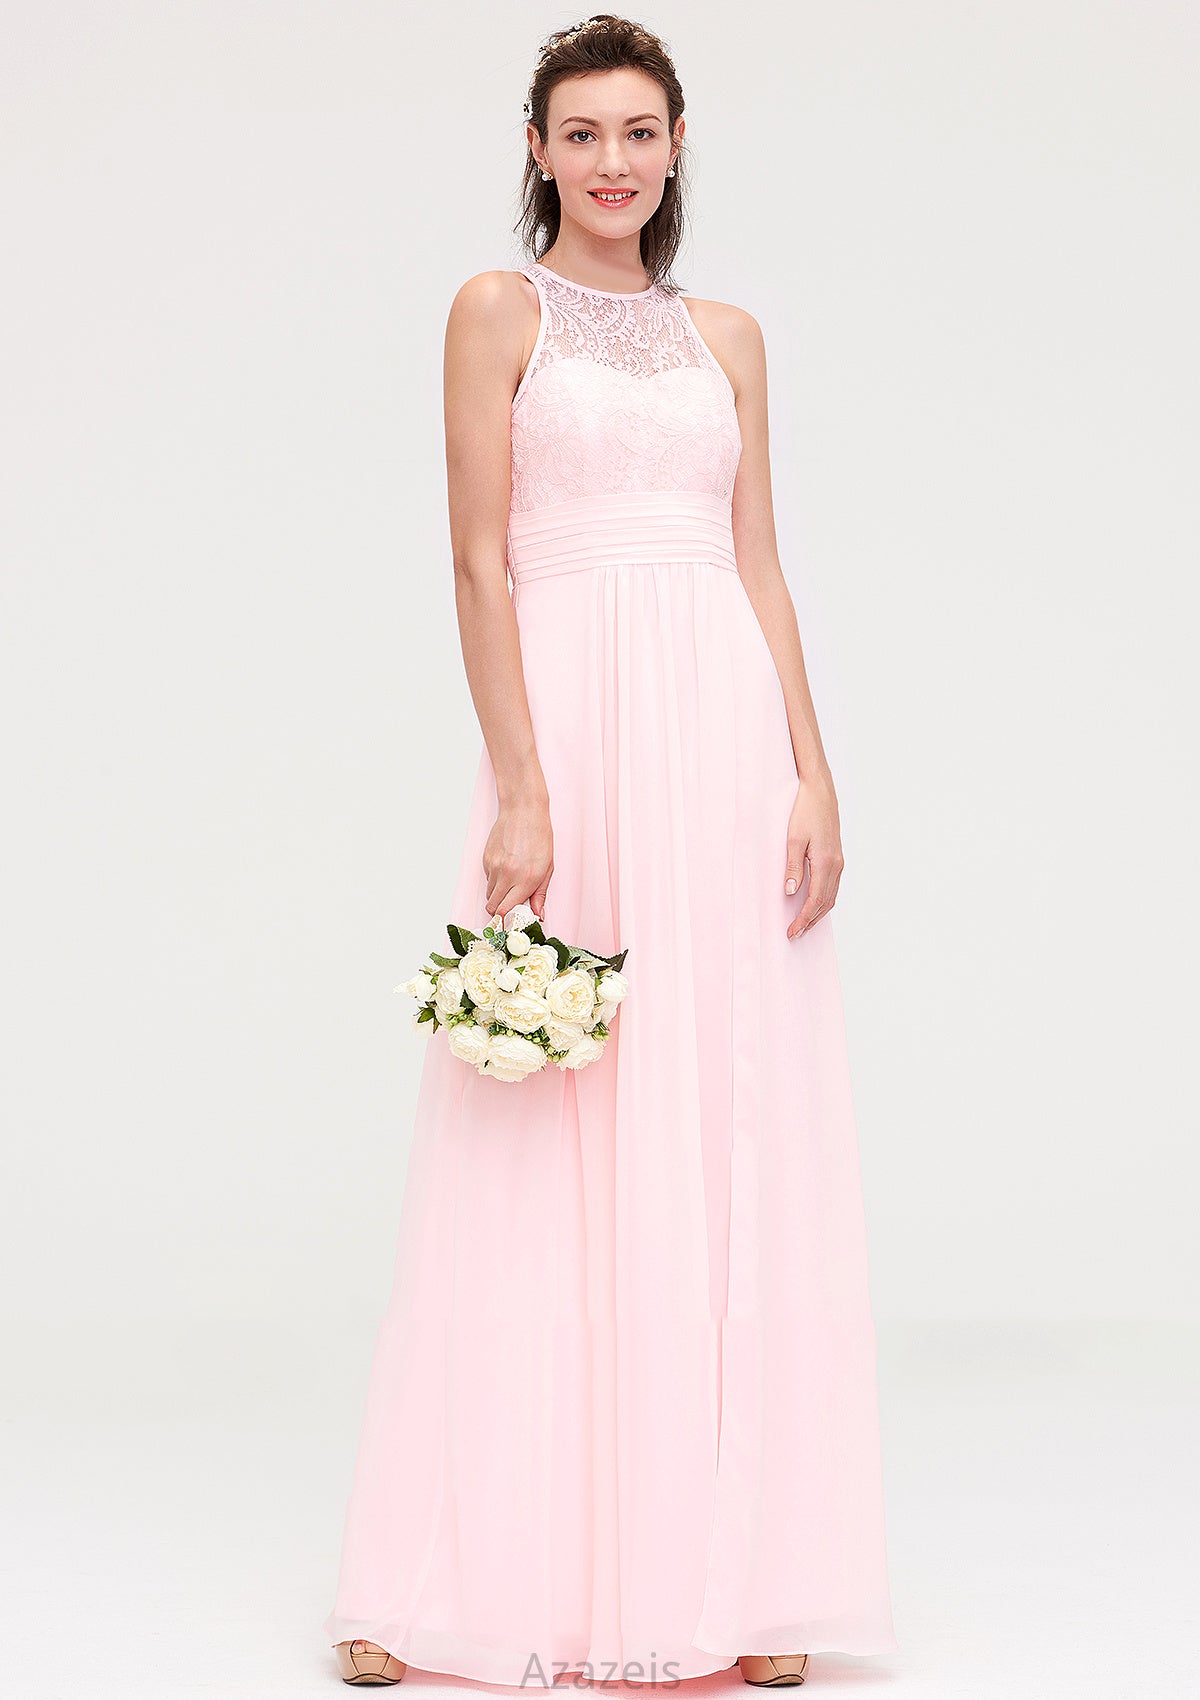 Sleeveless Scoop Neck Chiffon A-line/Princess Long/Floor-Length Bridesmaid Dresseses With Split Lace Jazlyn DFP0025349